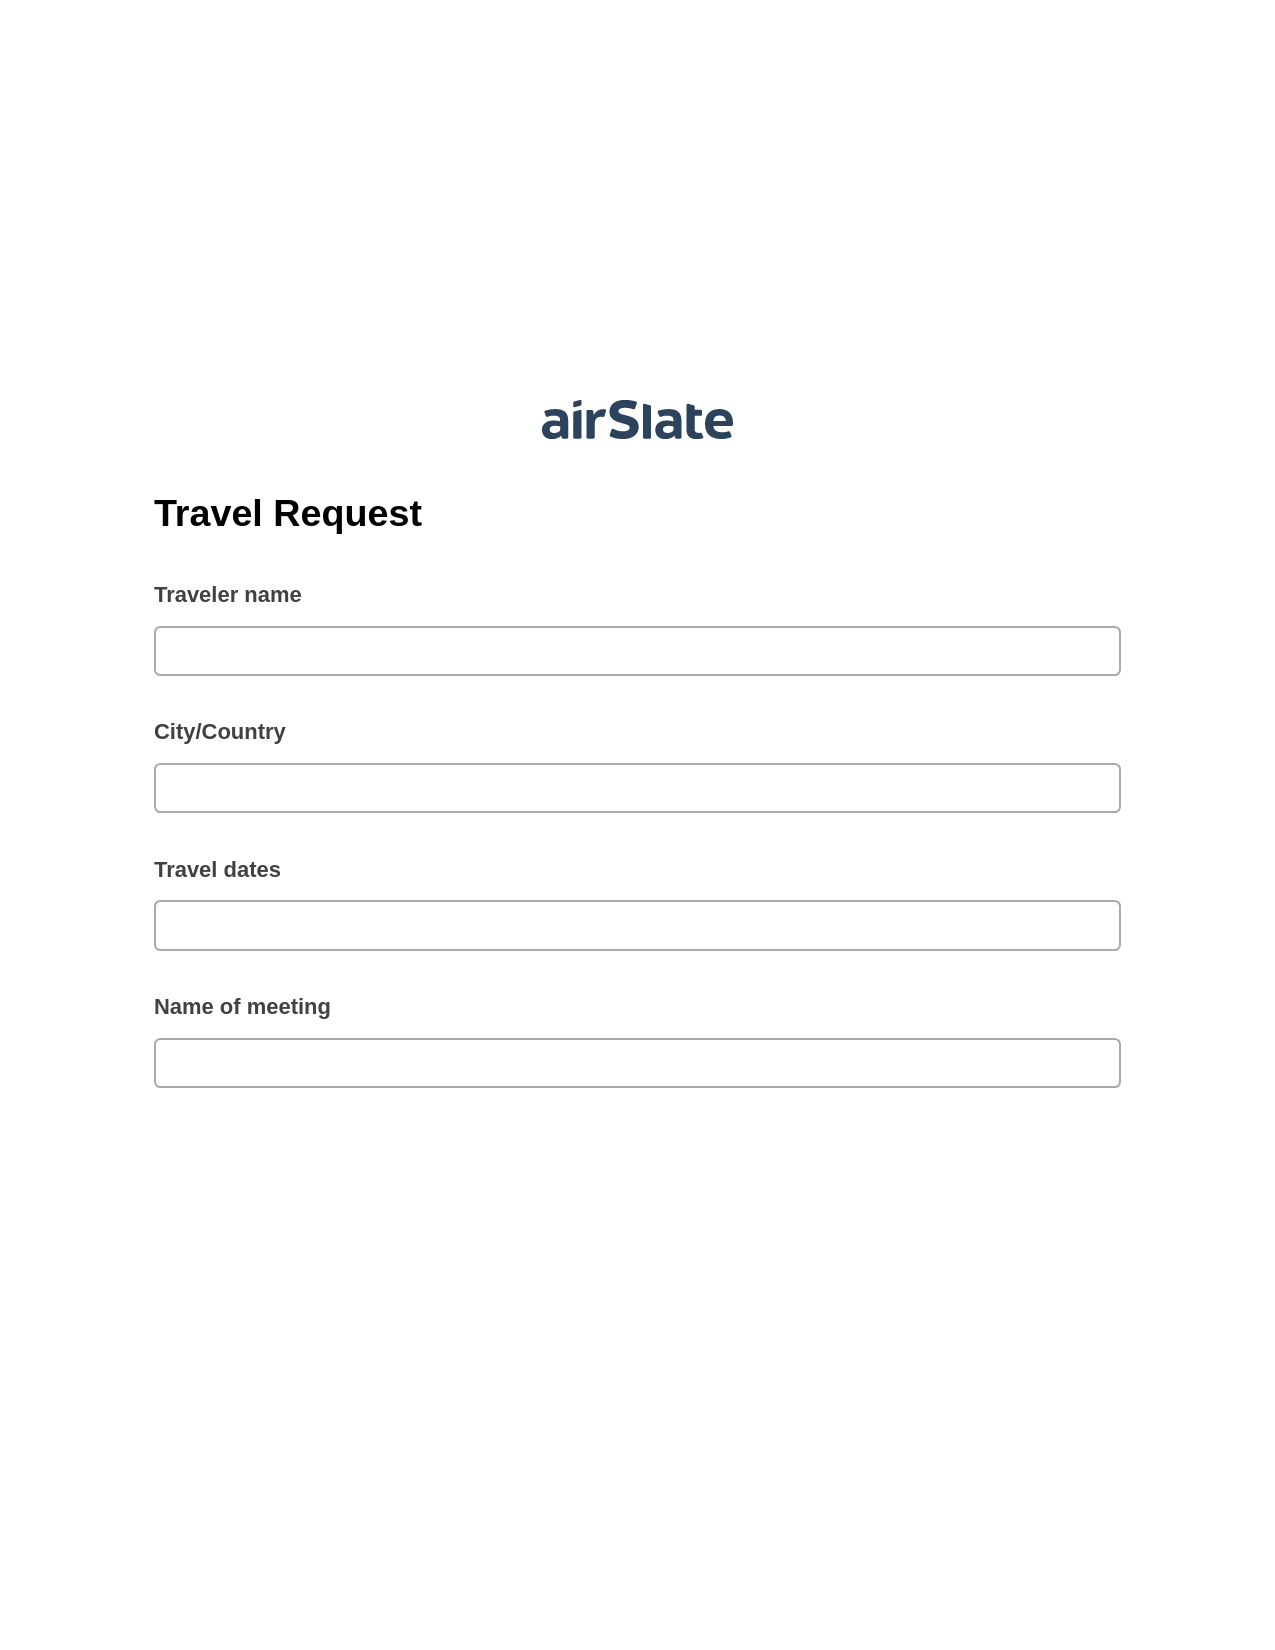 Travel Request Pre-fill Slate from MS Dynamics 365 Records Bot, Document Hide Bot, Export to Formstack Documents Bot